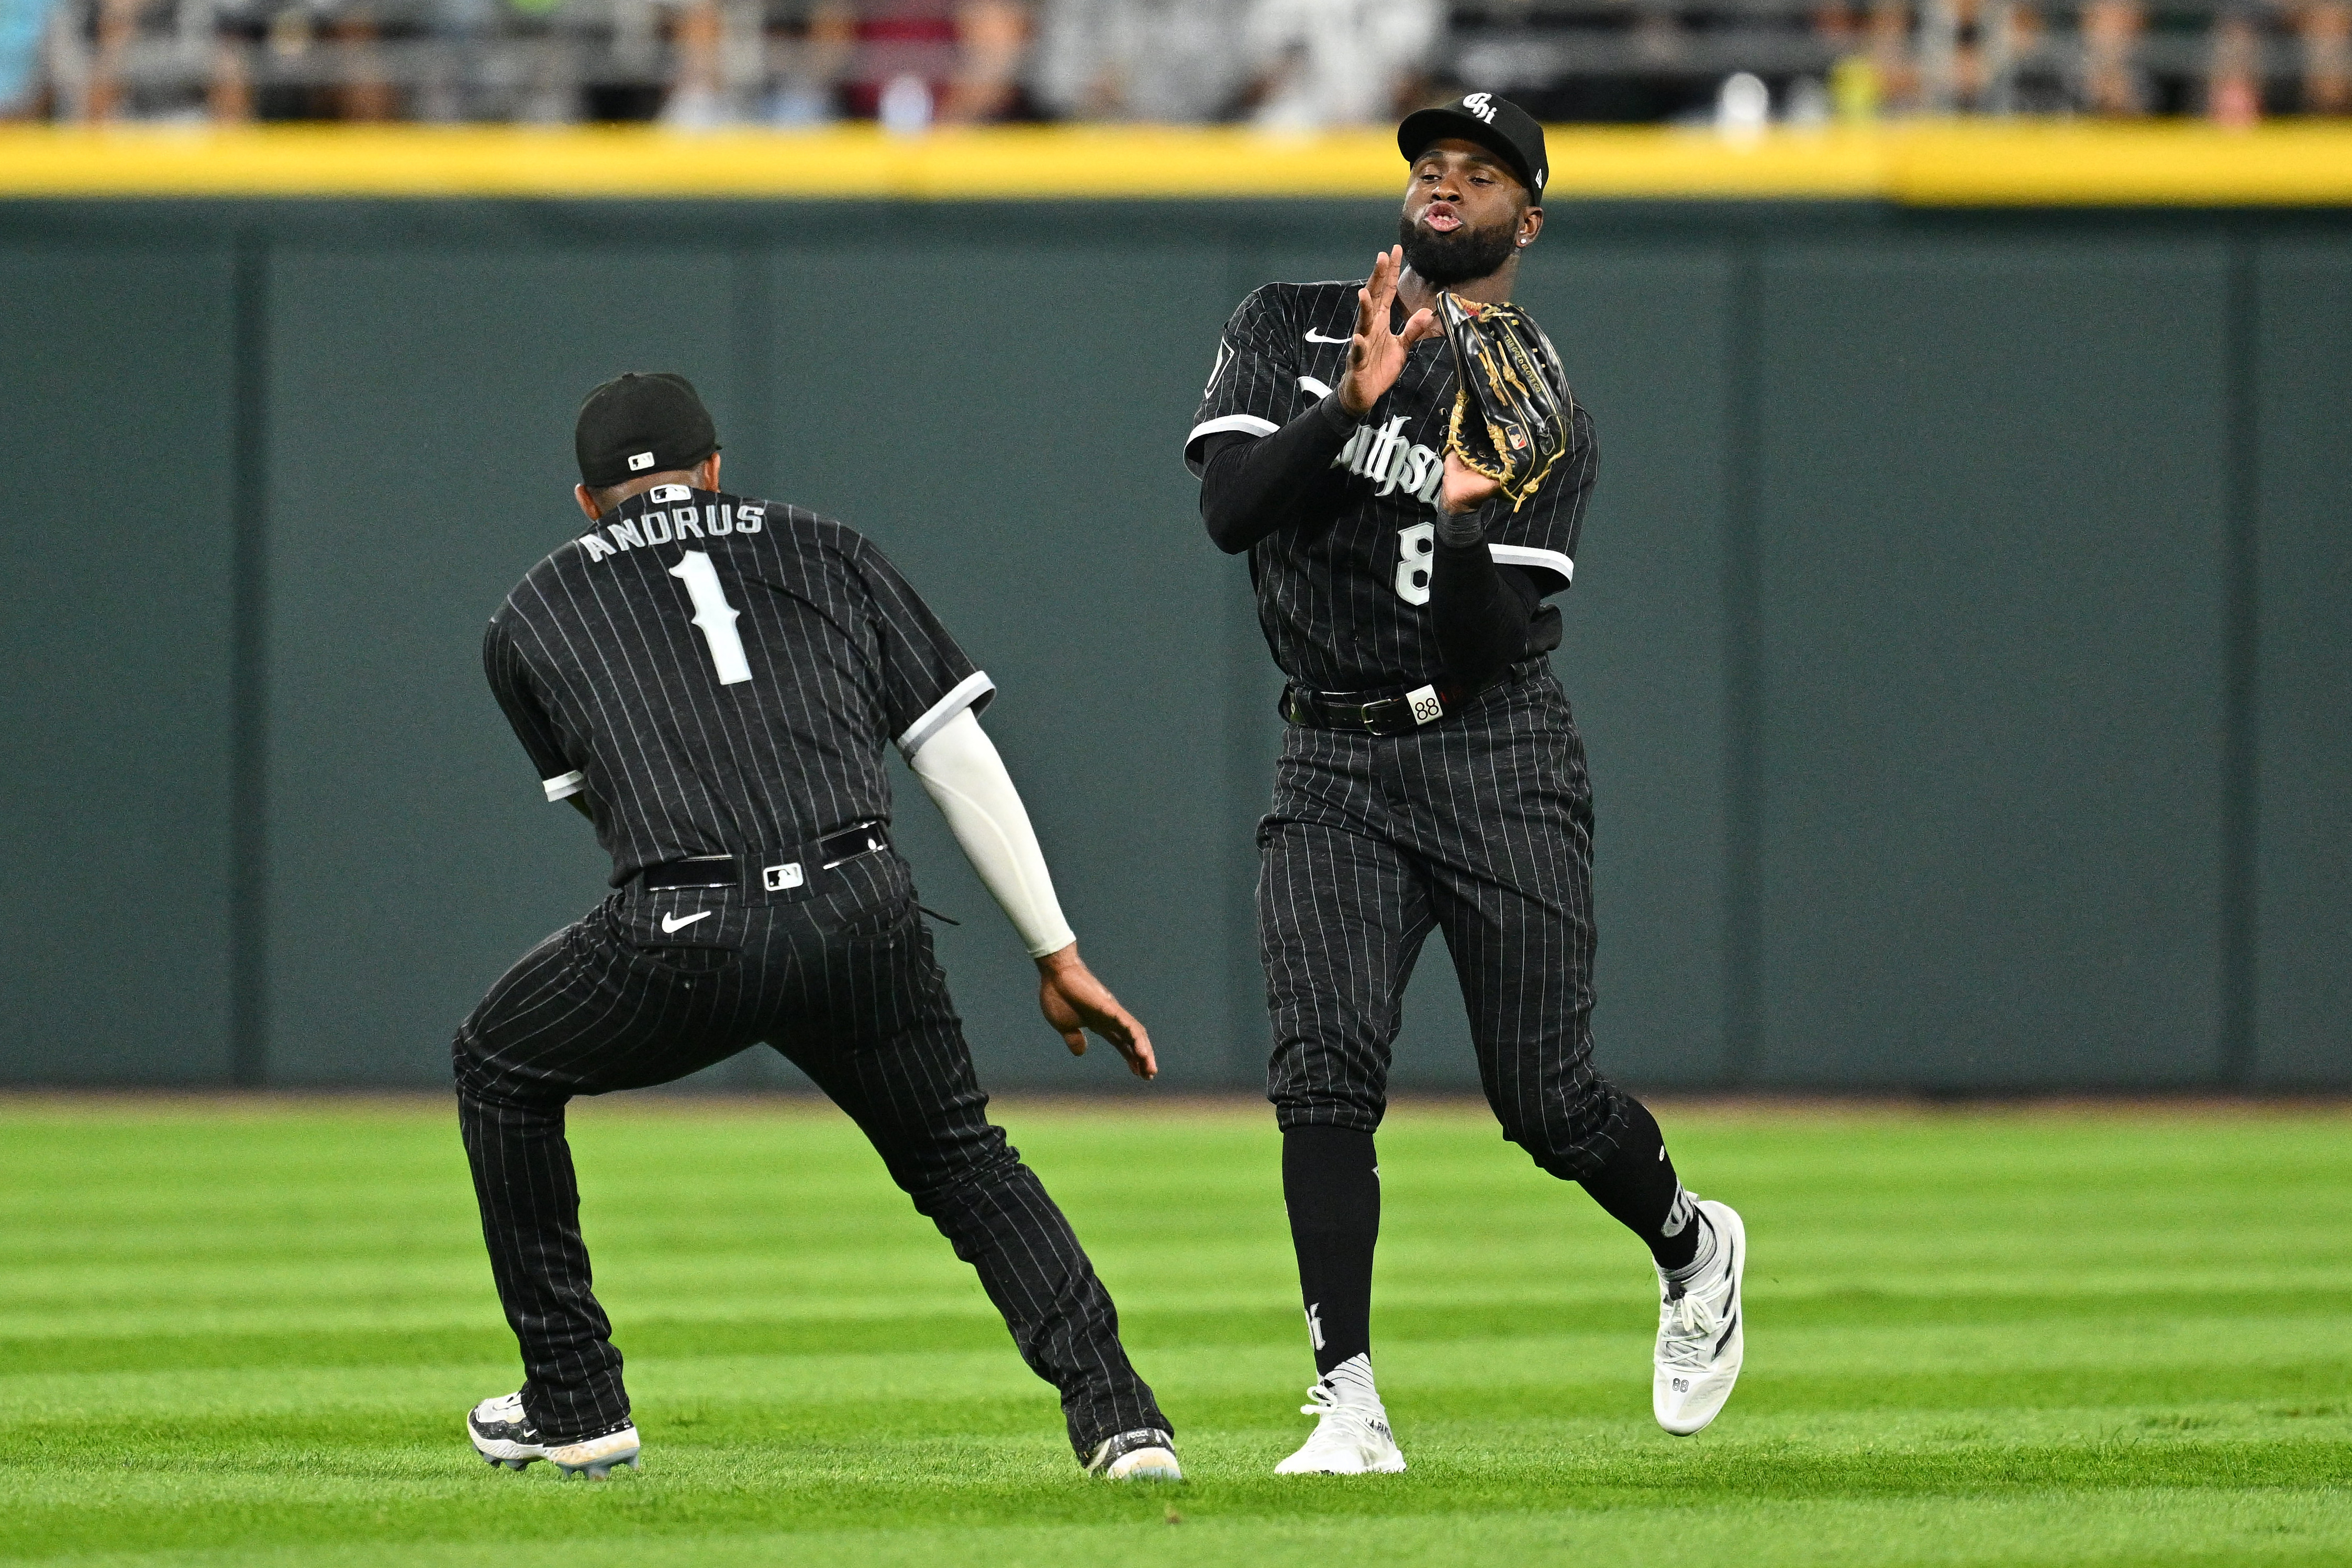 White Sox' losing streak hits nine as Pedro Grifol's ejection